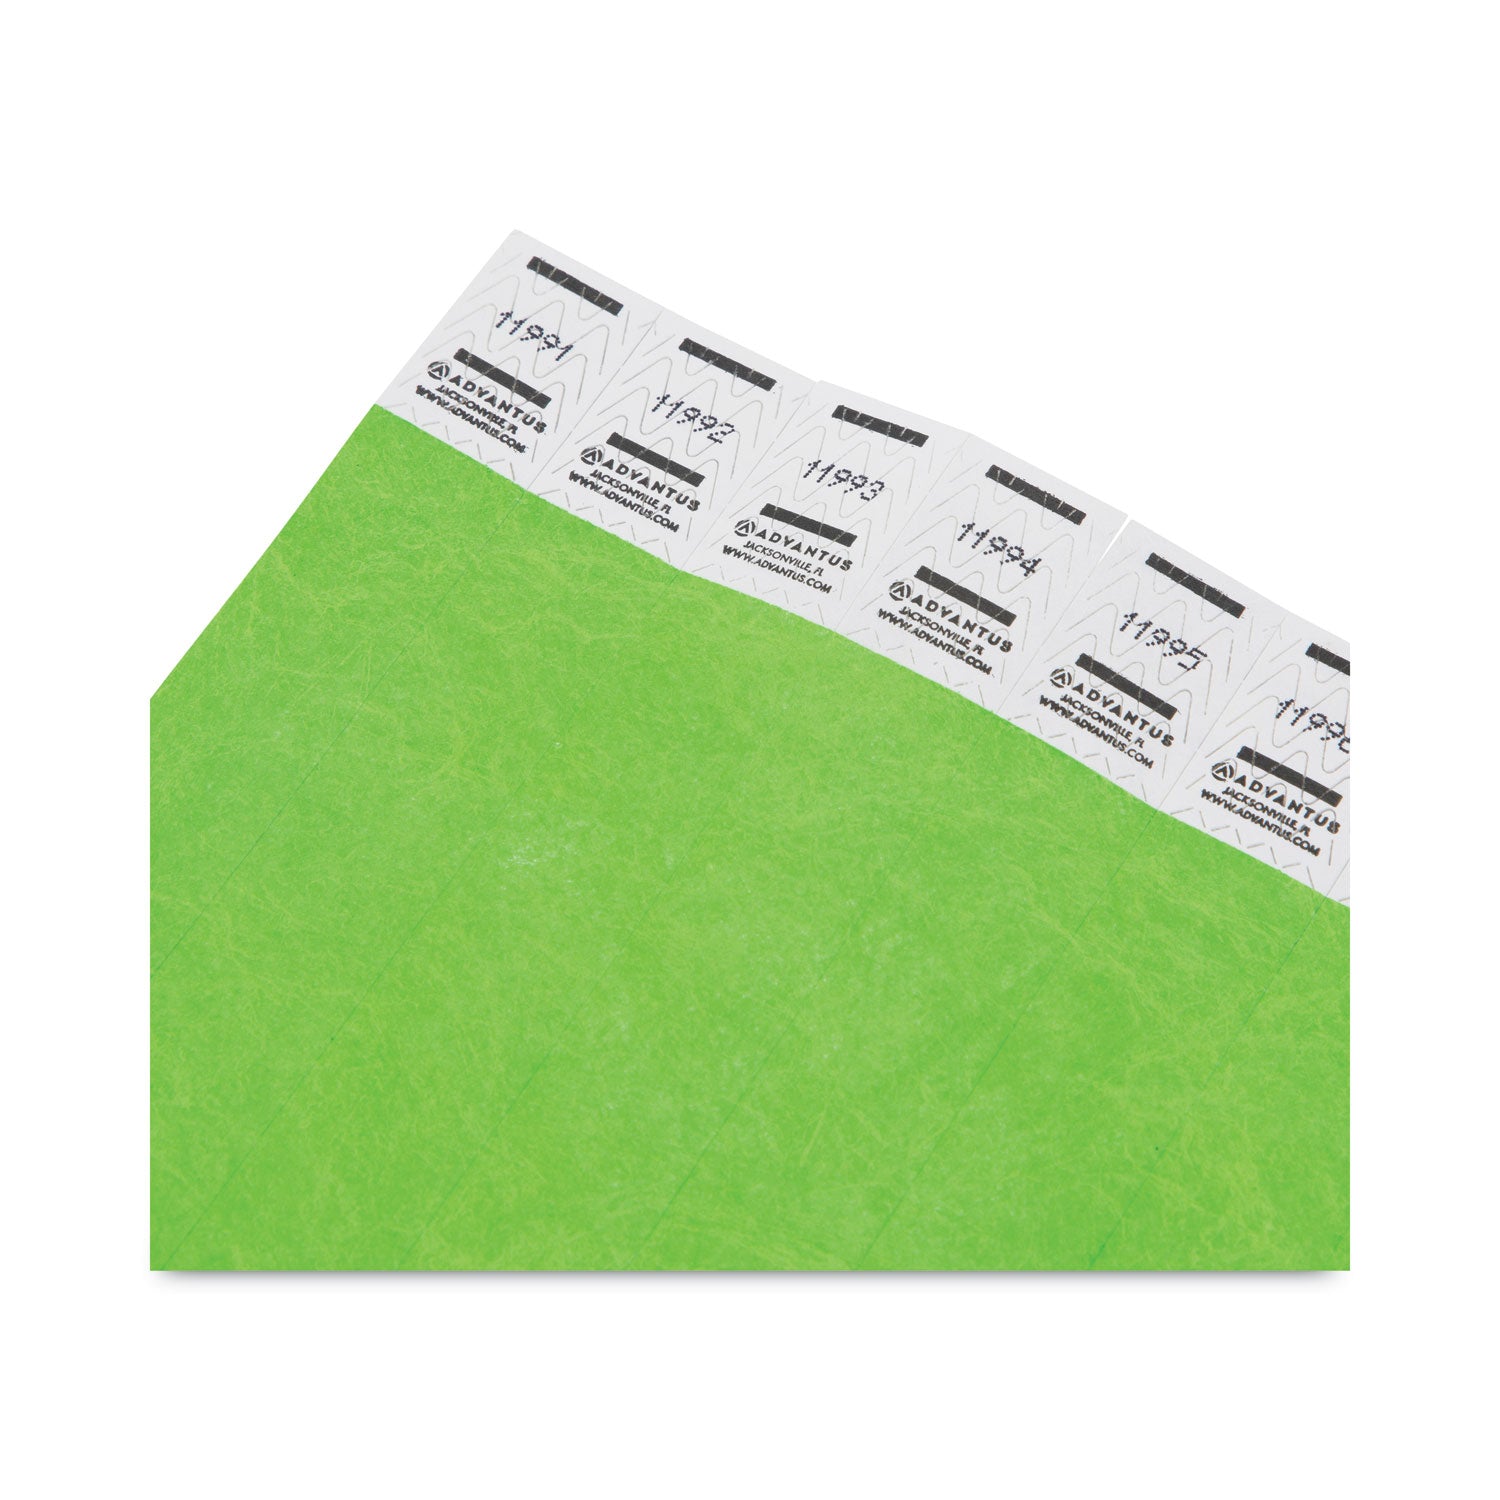 crowd-management-wristbands-sequentially-numbered-975-x-075-neon-green-500-pack_avt91122 - 4